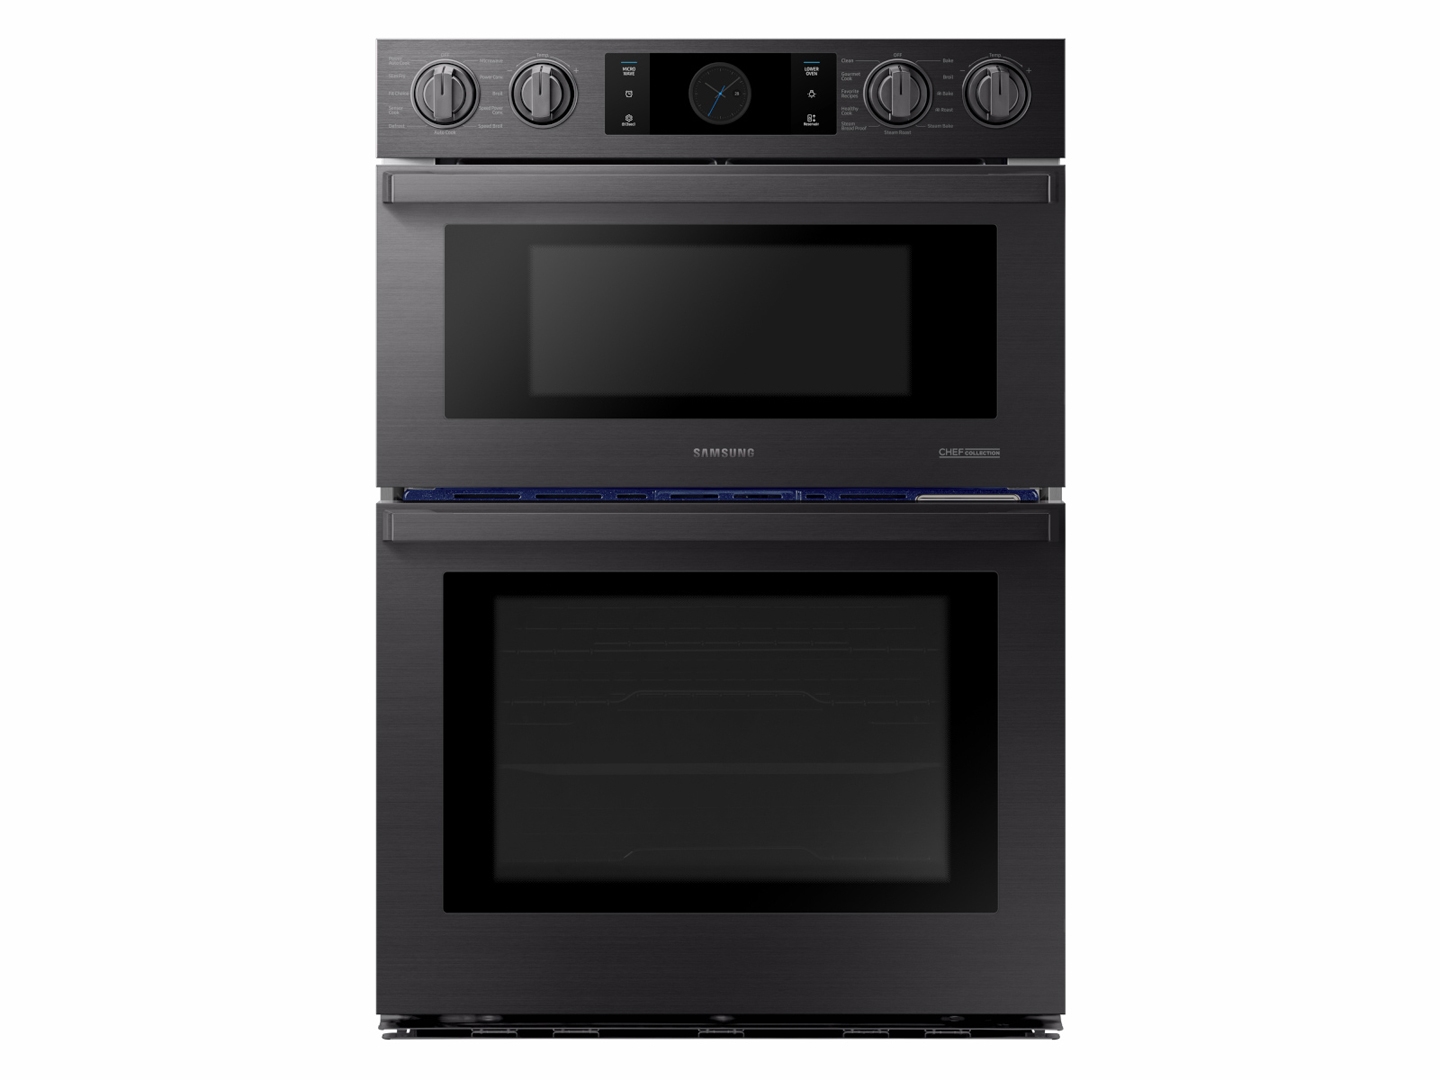 https://image-us.samsung.com/SamsungUS/home/home-appliances/wall-ovens/microwave-combination-oven/pdp/nq70m9770dm-aa/gallery/carousel-image-1-20171020.jpg